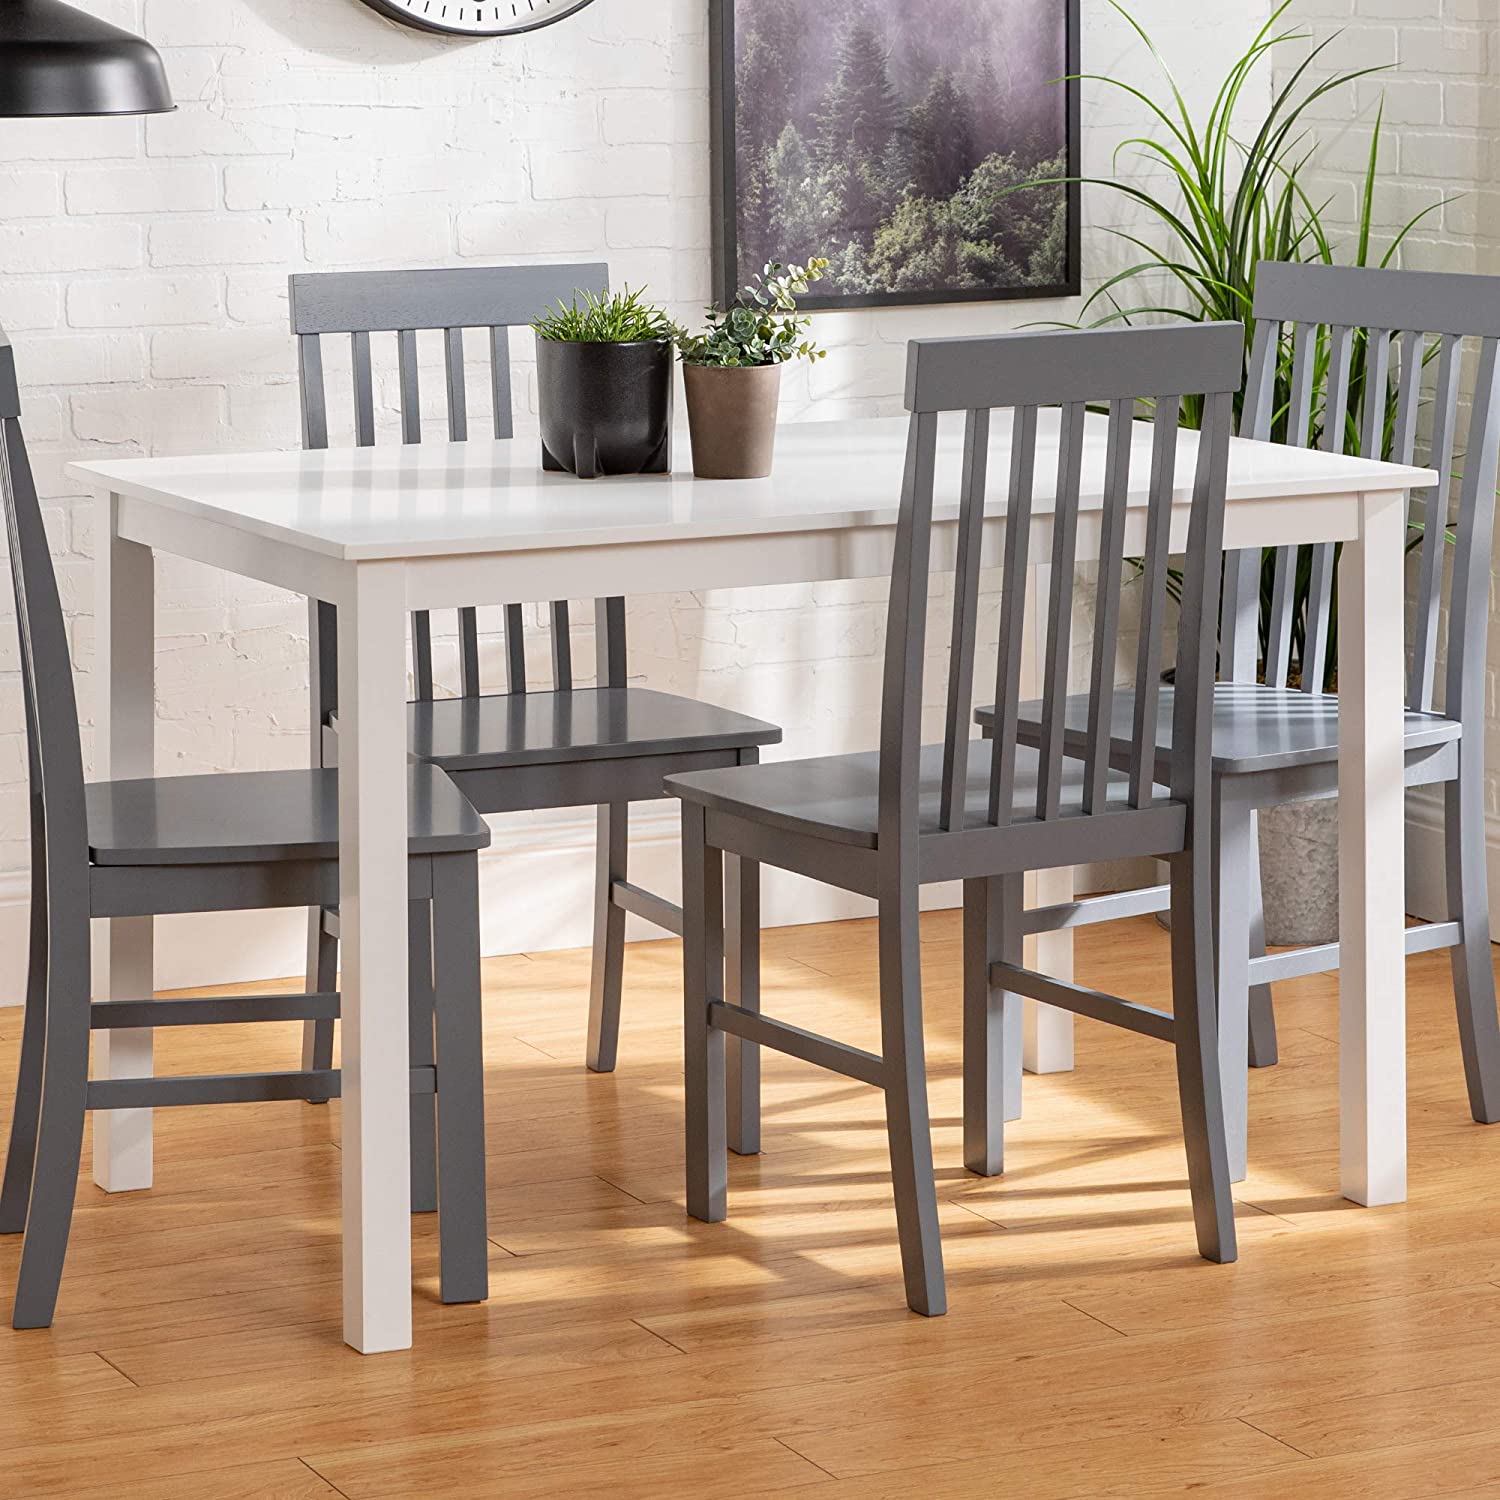 Walker Edison Slatted Back Chairs Small Dining Set, 5-Piece